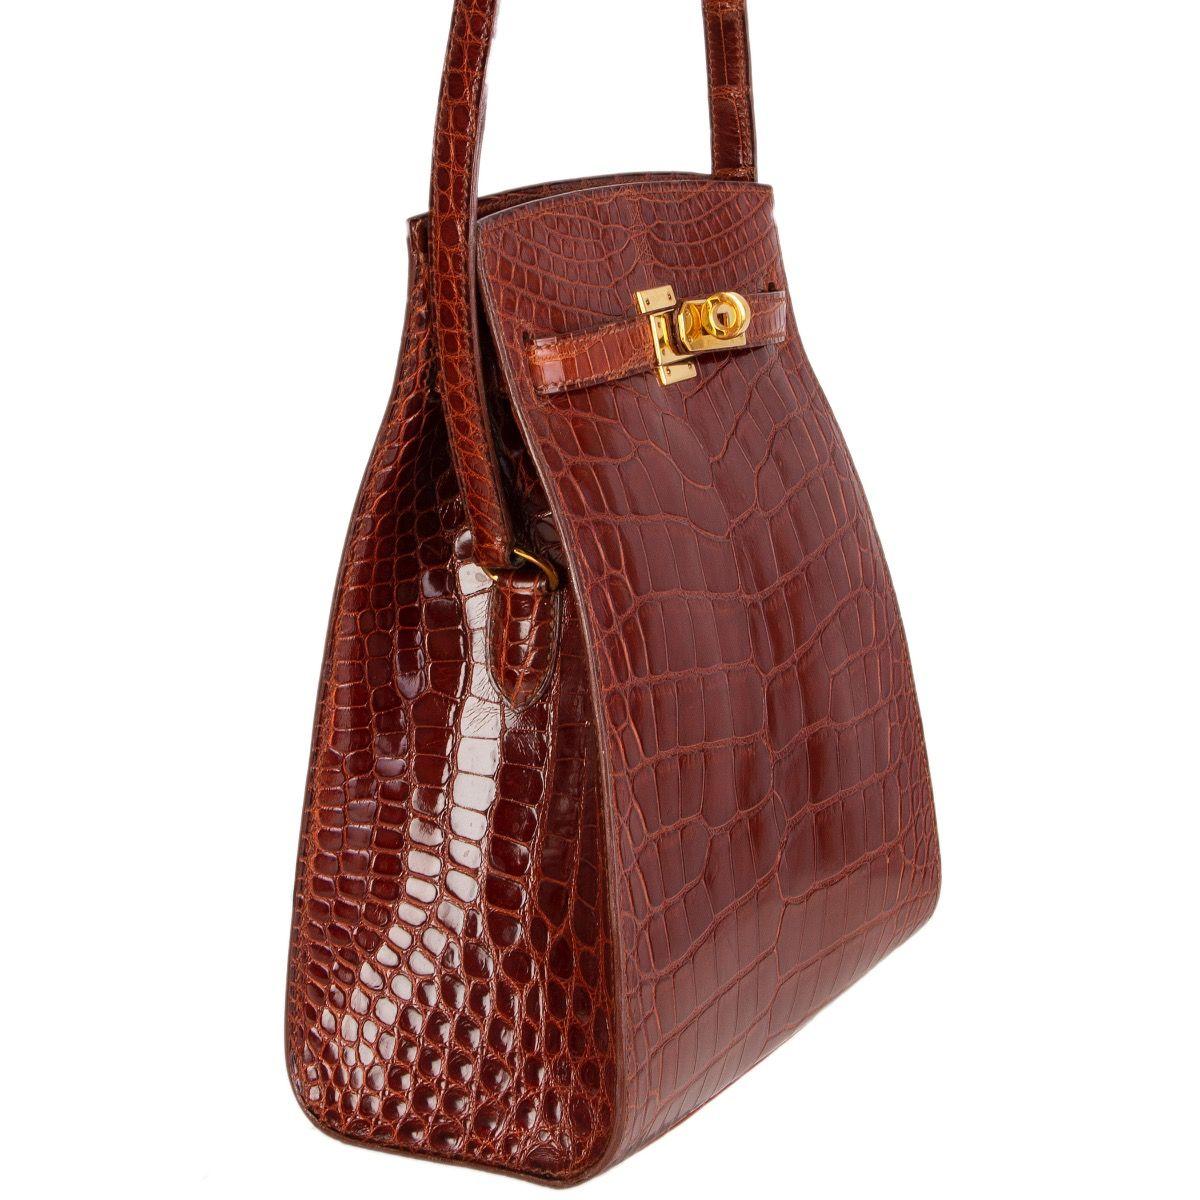 Hermes 'Kelly Sport' crossbody bag in Miel (honey brown) shiny alligator crocodile. Lined in Chevre (goatskin) with an open pocket against the front and back. Has been carried and is in excellent condition. 

Height 24cm (9.4in)
Width 19cm